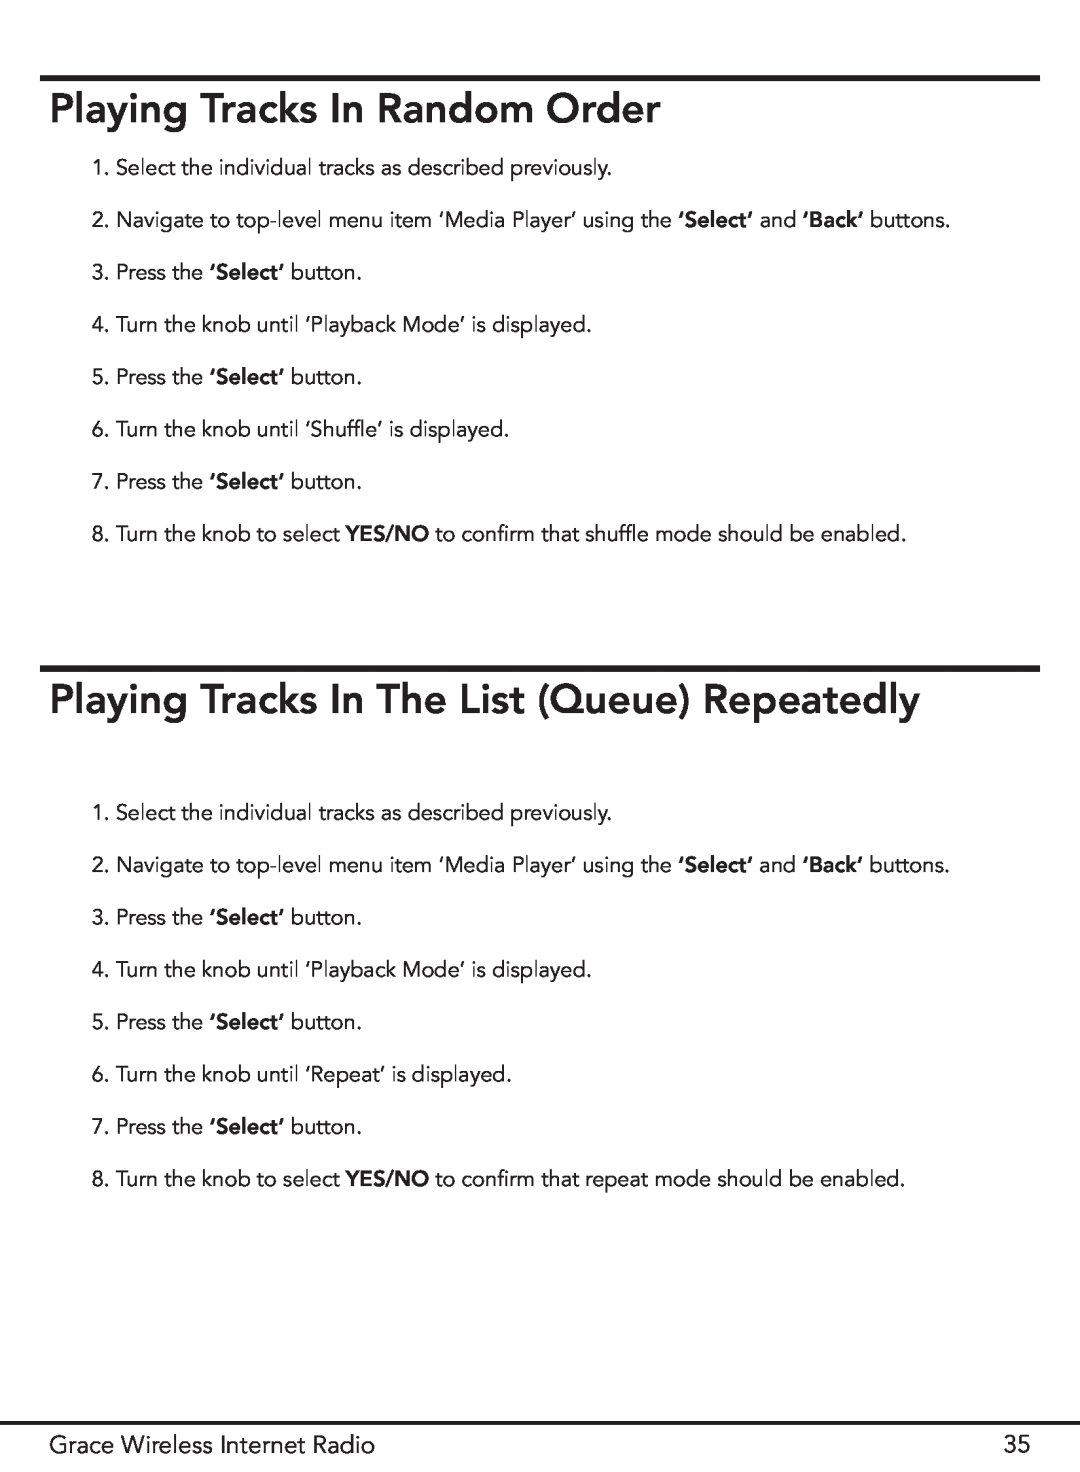 Grace GDI-IR2000 manual Playing Tracks In Random Order, Playing Tracks In The List Queue Repeatedly 